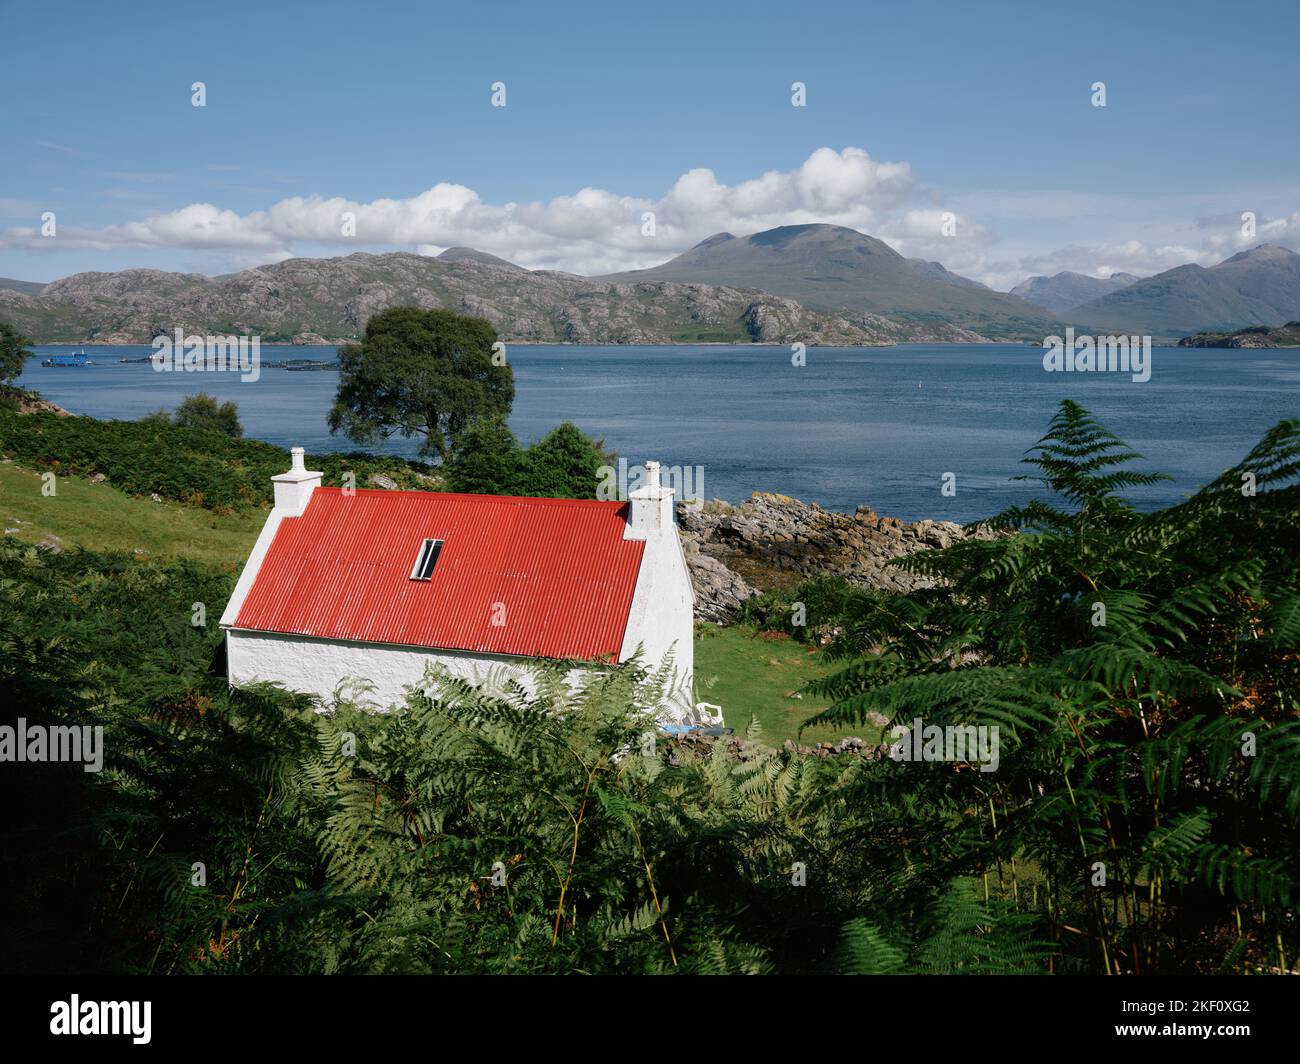 A red roofed white washed croft cottage overlooking Loch Shieldaig and the Torridon mountains landscape in Wester Ross, Scotland UK Stock Photo